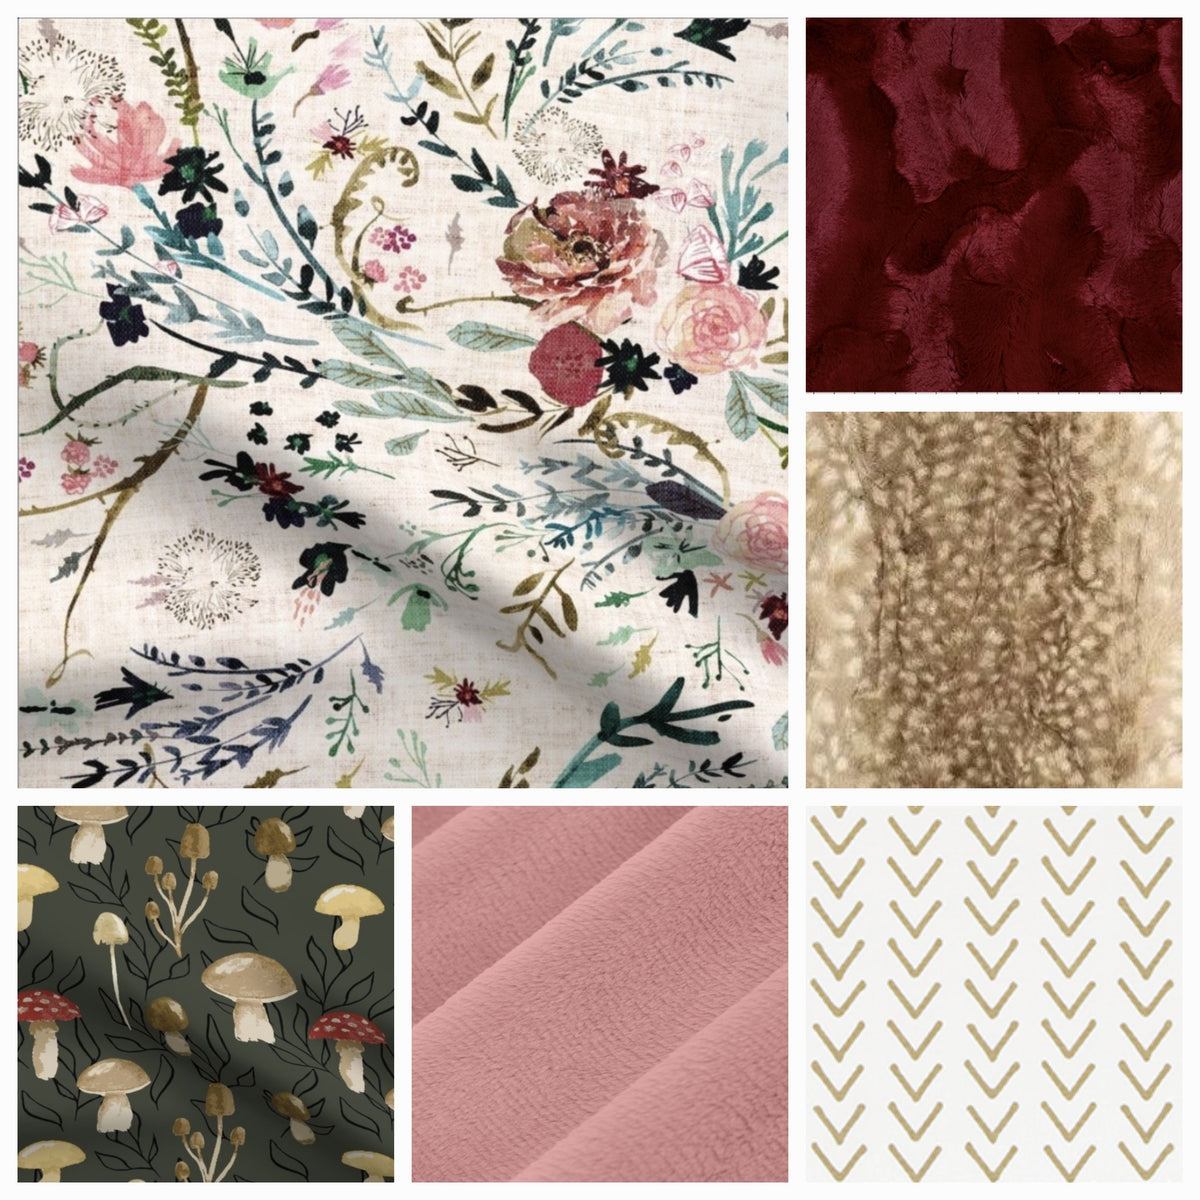 New Release Girl Crib Bedding- Whimsical Woodlanf Floral Baby Bedding &amp; Nursery Collection - DBC Baby Bedding Co 